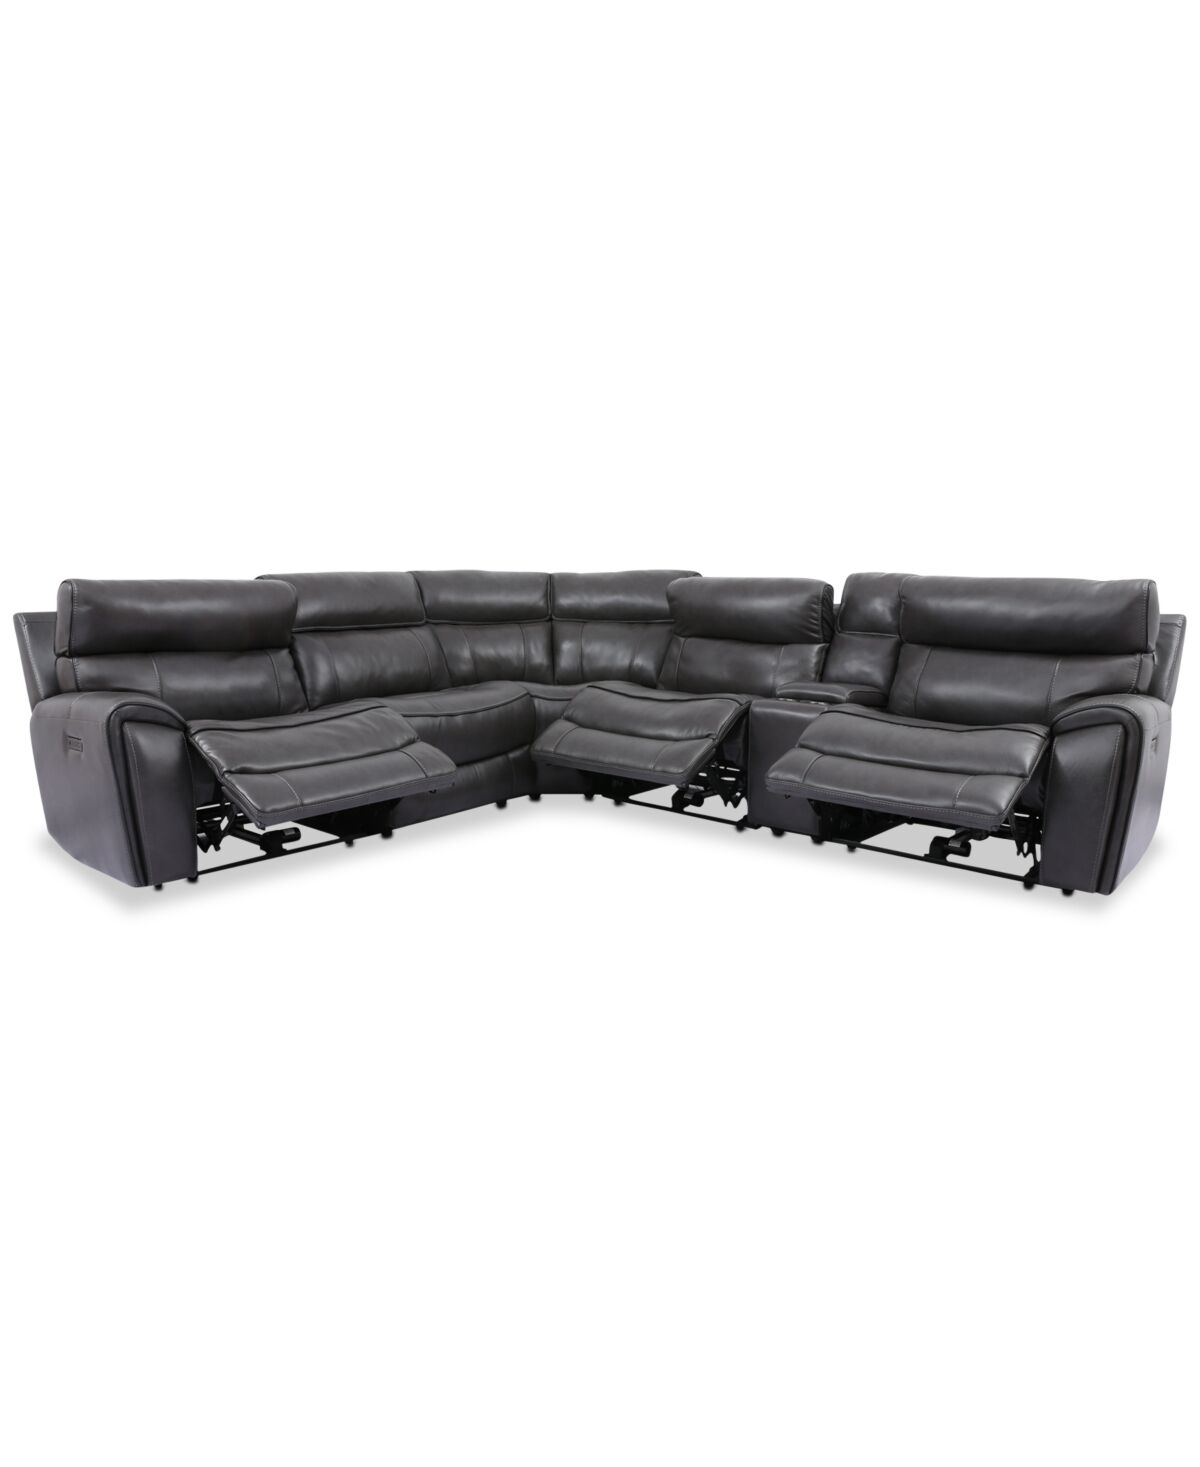 Furniture Closeout! Hutchenson 6-Pc. Leather Sectional with 3 Power Recliners, Power Headrests and Console with Usb - Charcoal Grey